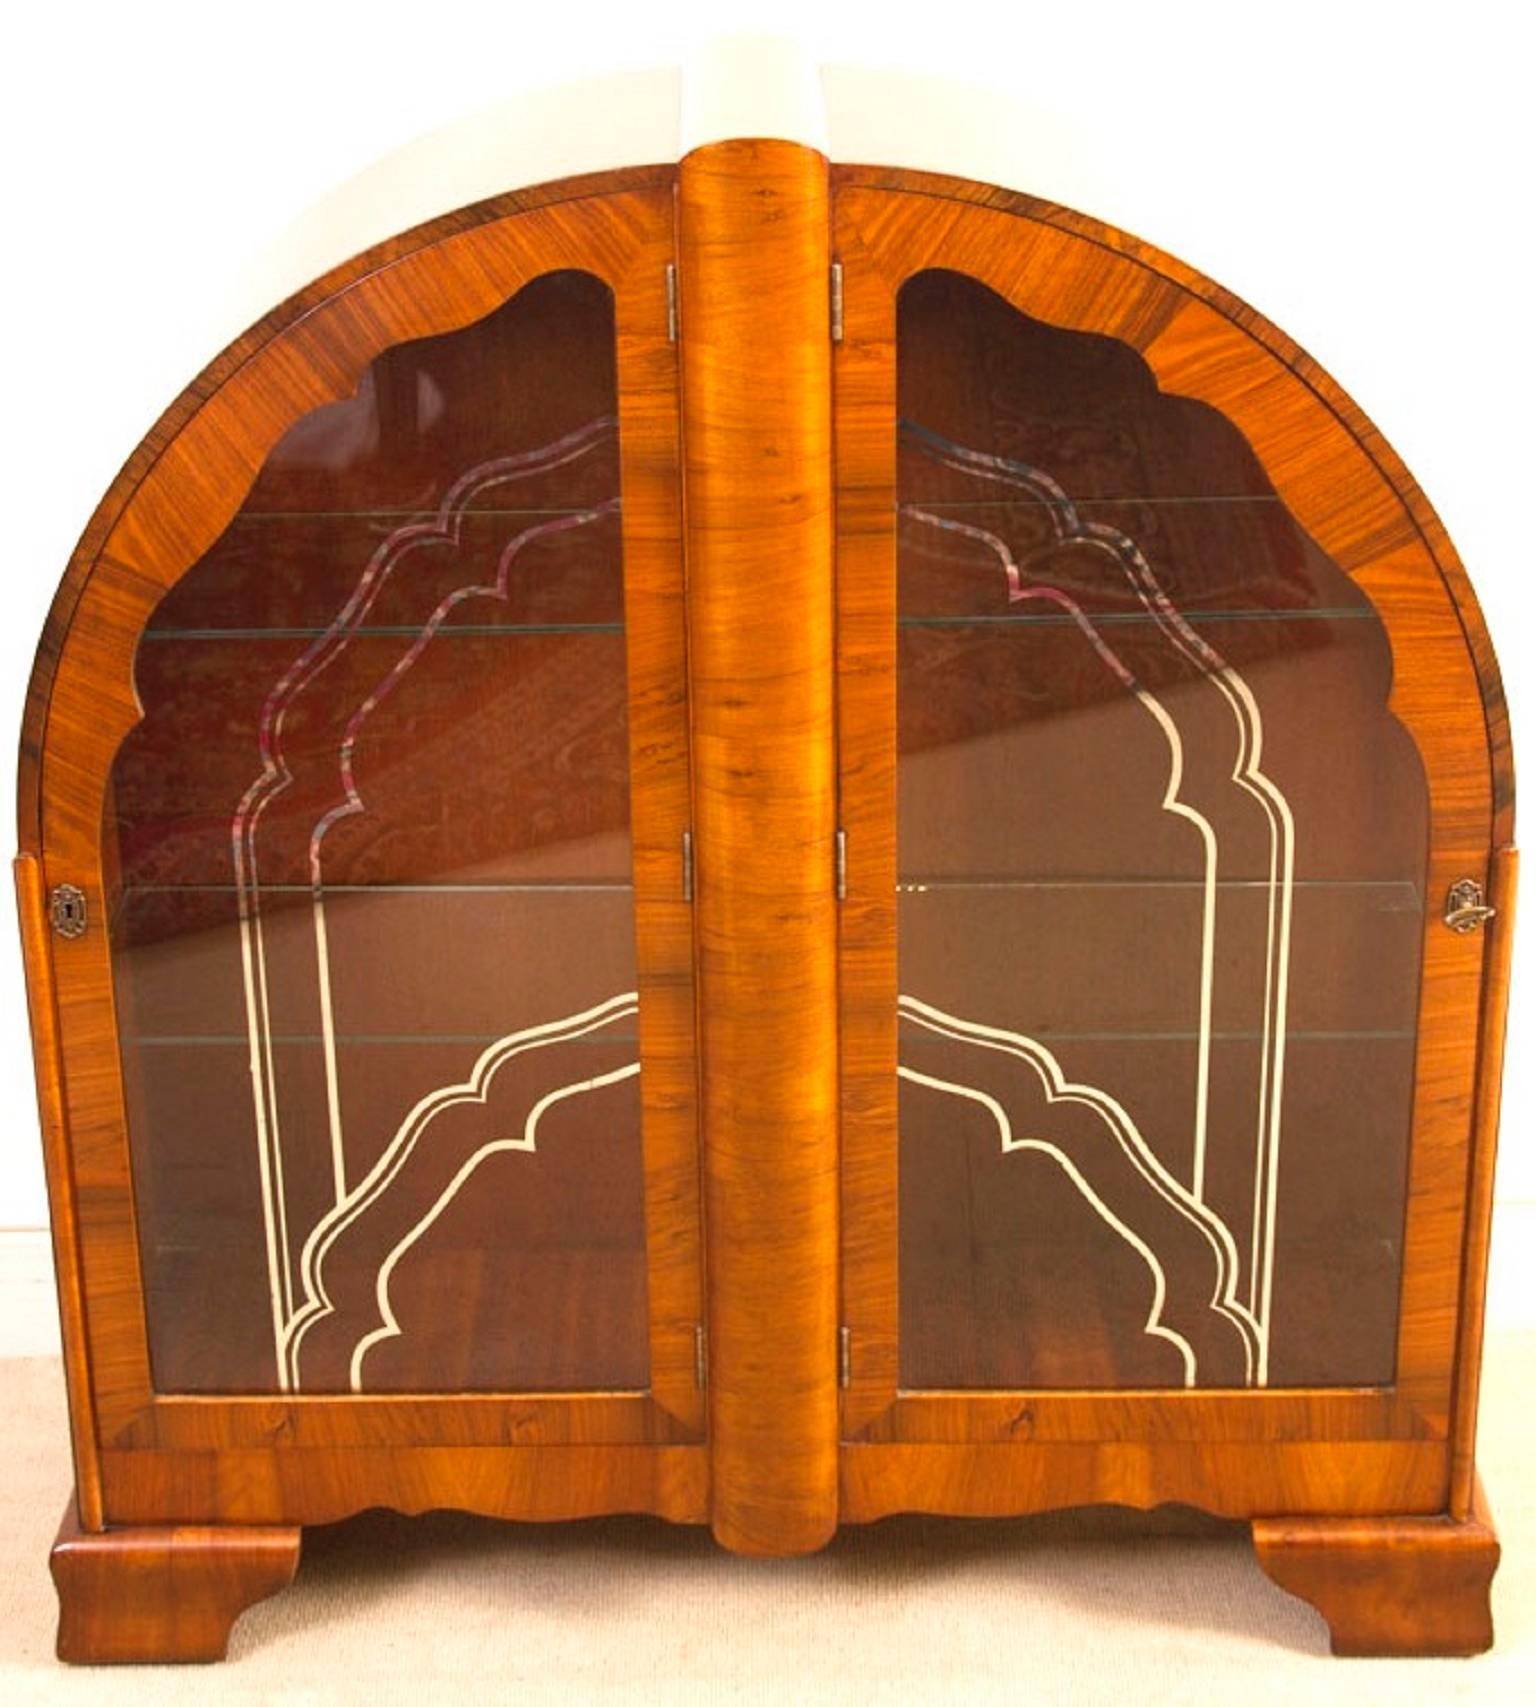 This is a lovely antique Art Deco burr walnut domed display cabinet, circa 1920.

The cabinet features inward hinged glass doors with the original silvered glazing and two glass shelves.

It stands on striking shaped bracket feet.

It is an